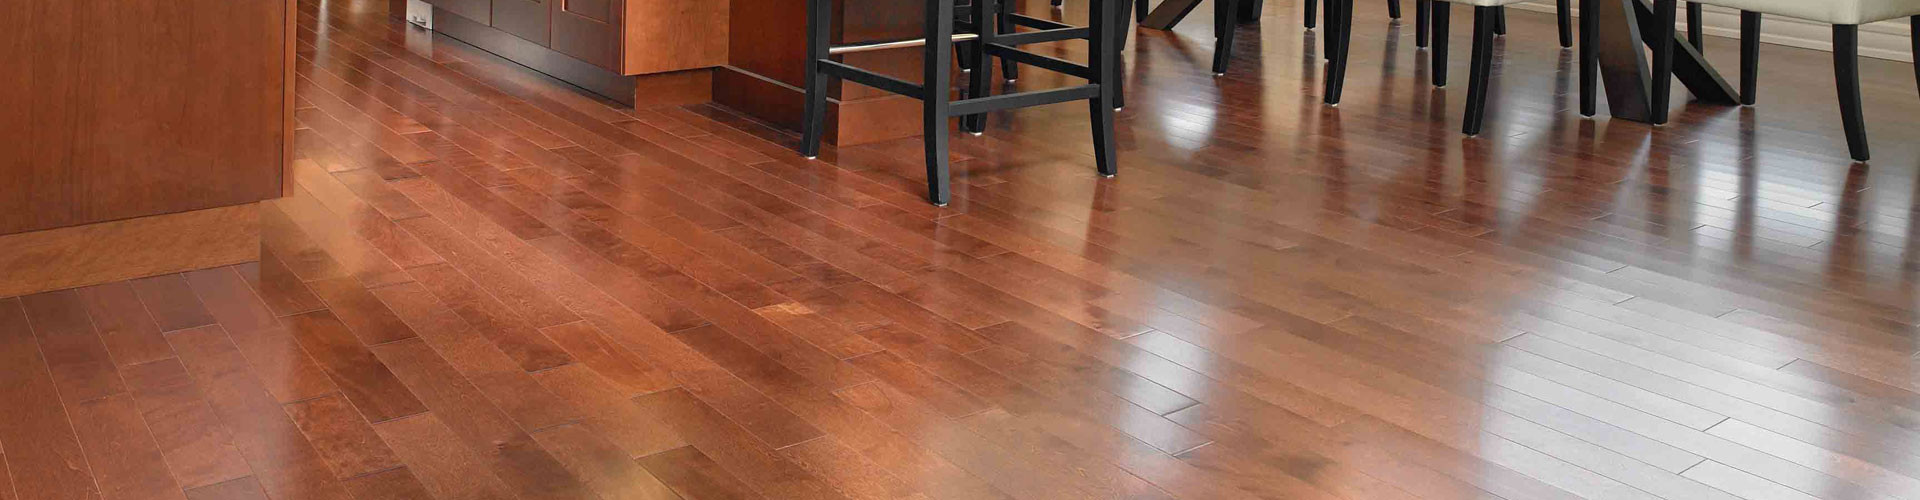 15 Unique Hardwood Floor Refinishing In Livonia Mi 2024 free download hardwood floor refinishing in livonia mi of hardwood floors ann arbor mi hardwood floors rochester mi with why choose us